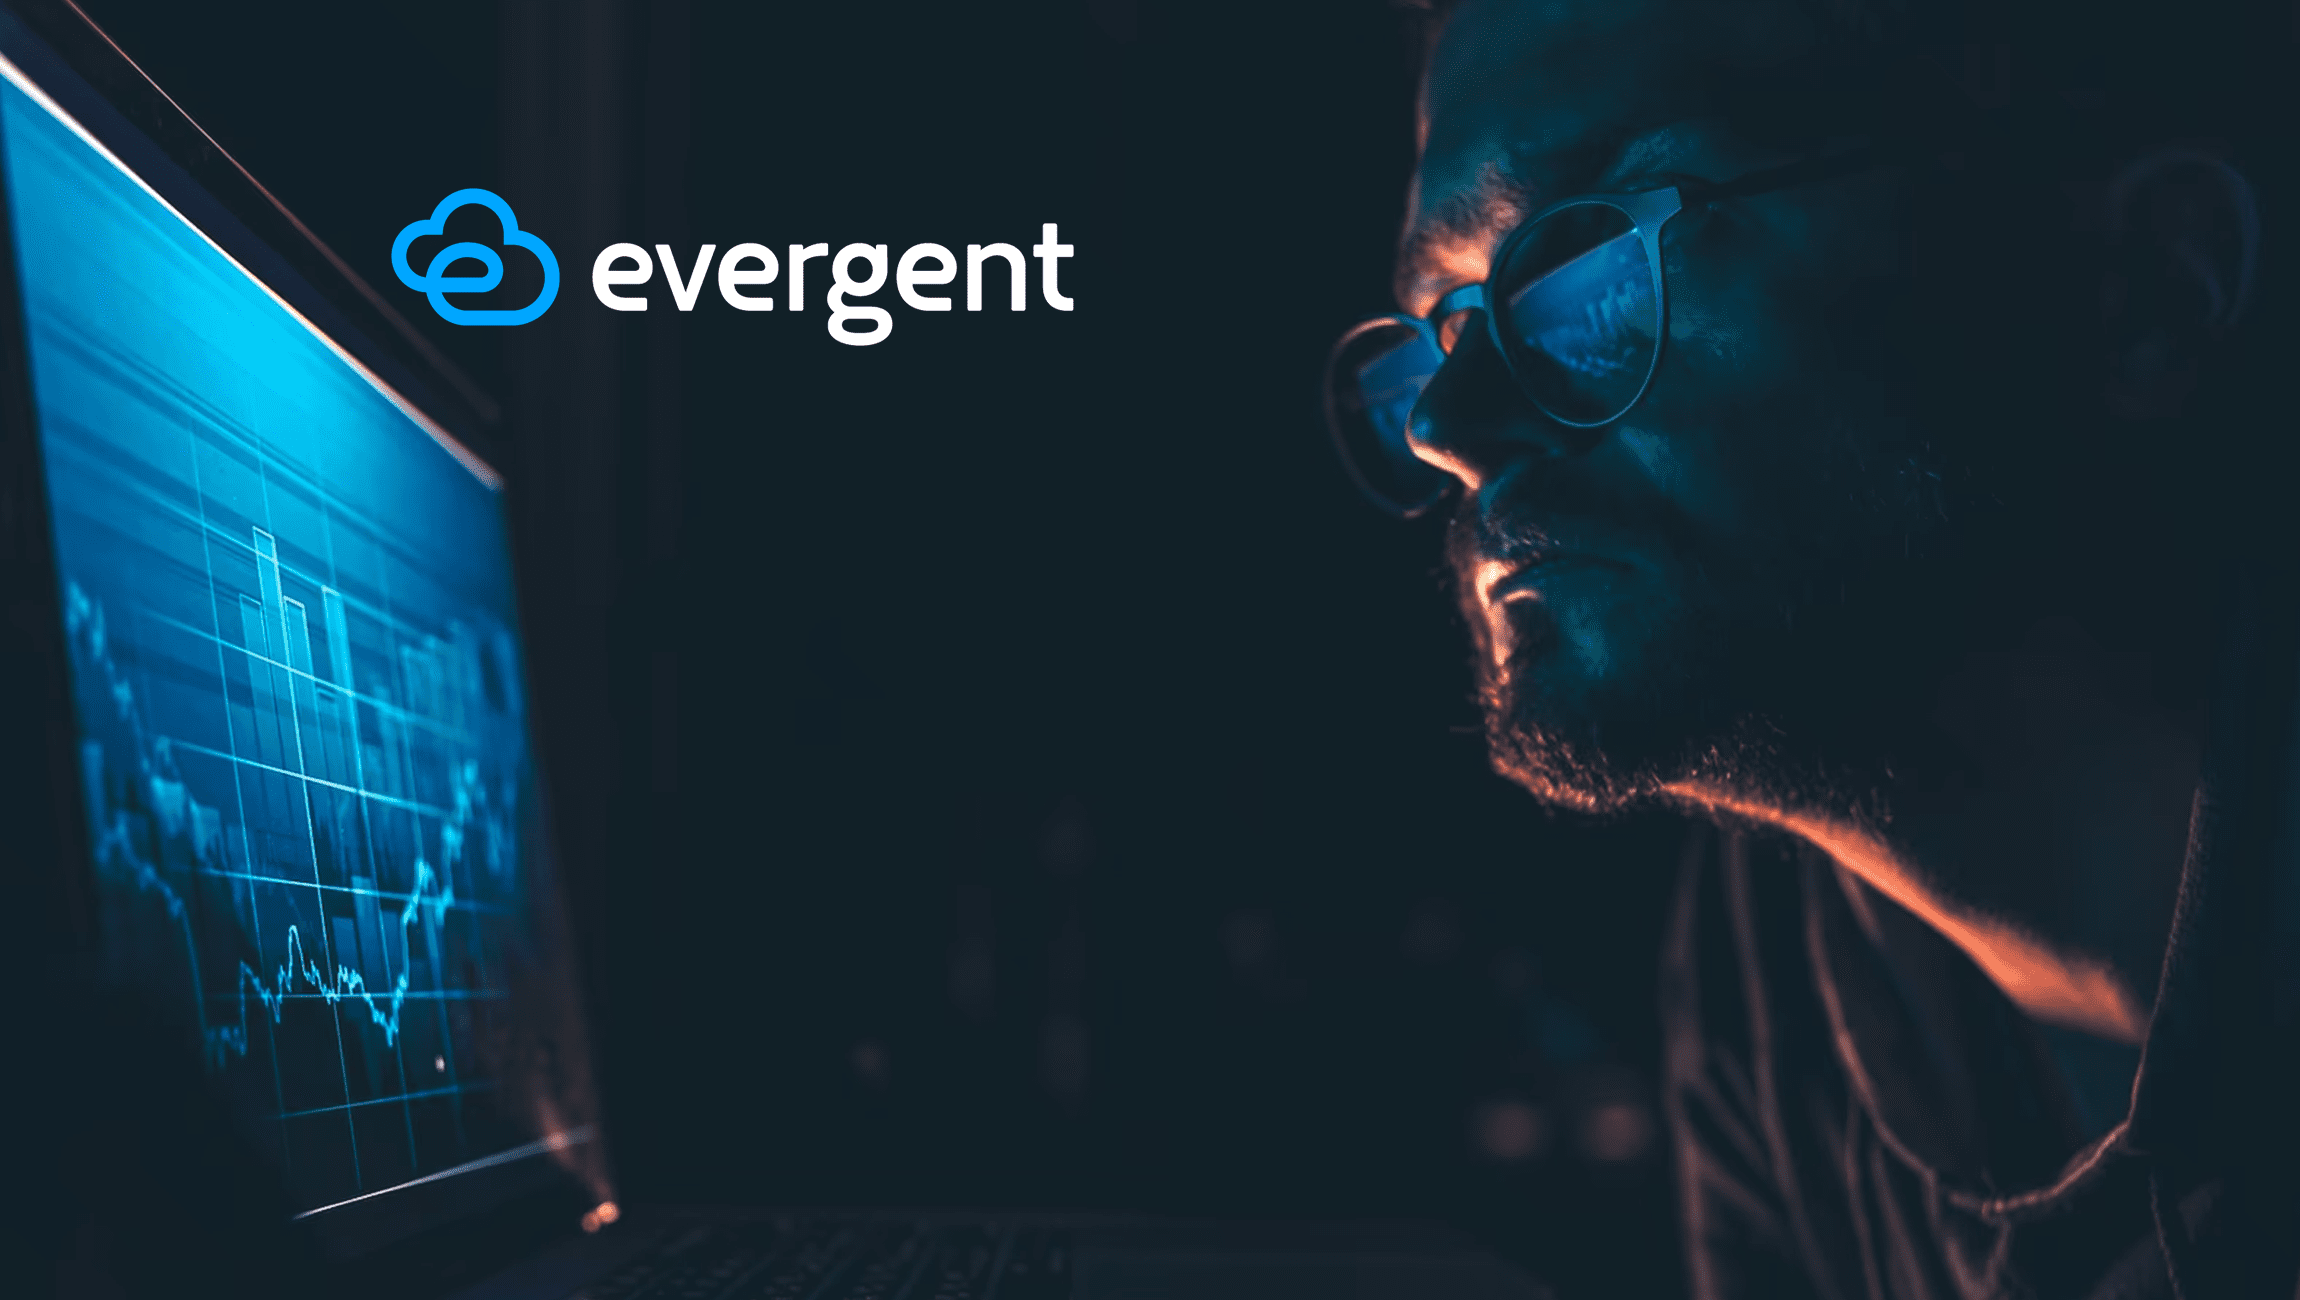 Evergent Announces Launch of New Product to Help Digital Service Providers Manage Revenue and Royalties